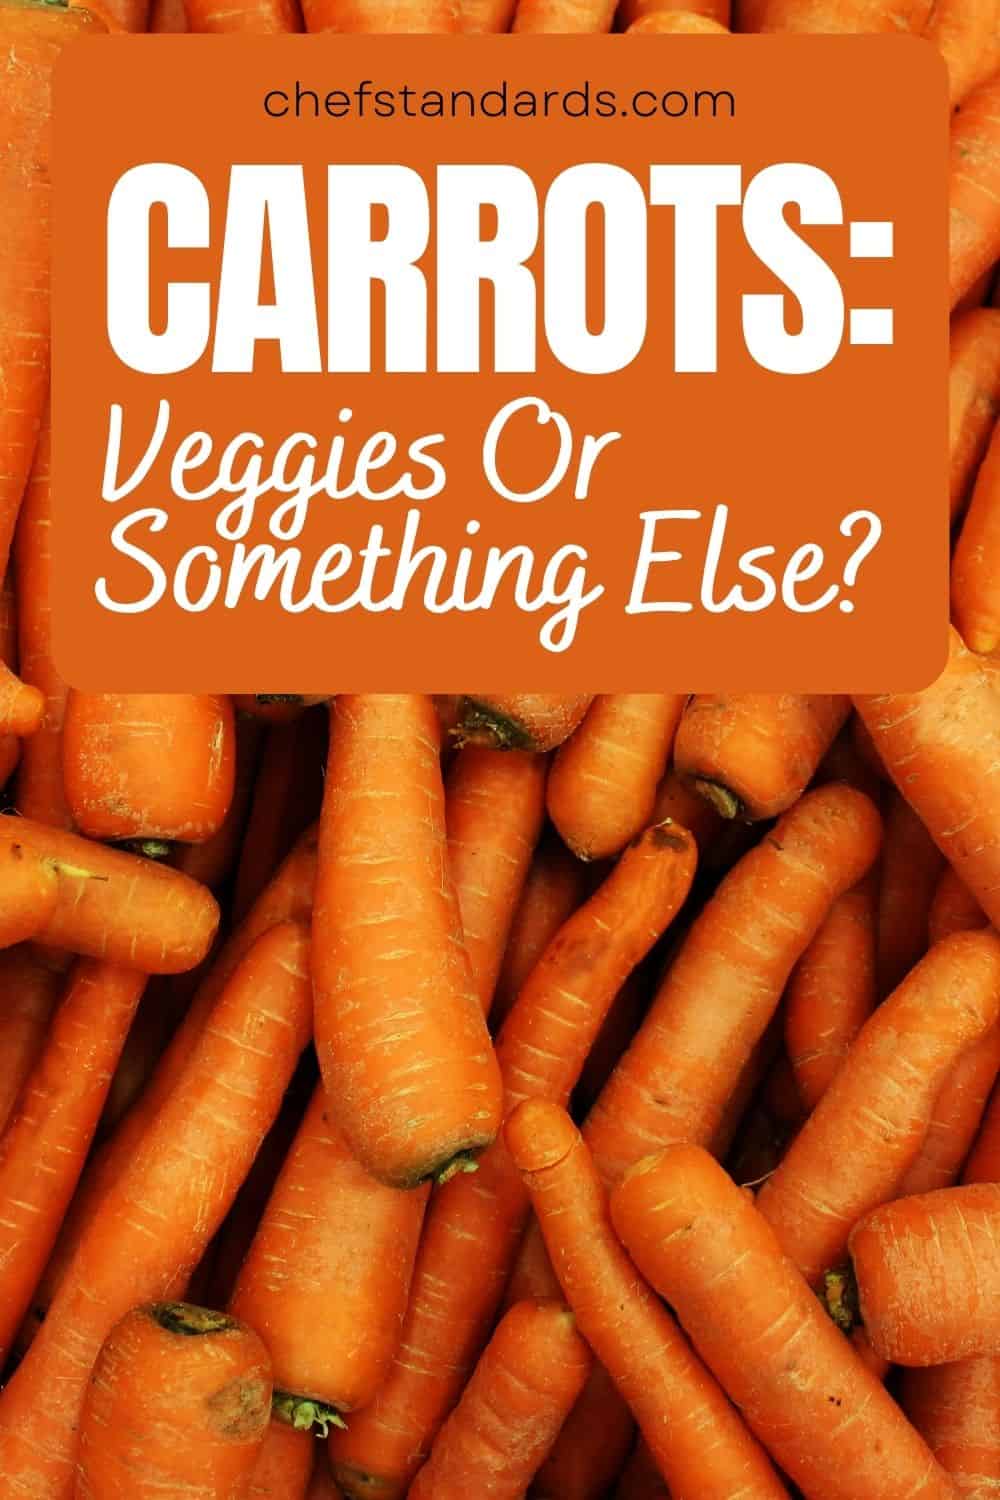 Are Carrots Vegetables Carrots Classification Debugged
